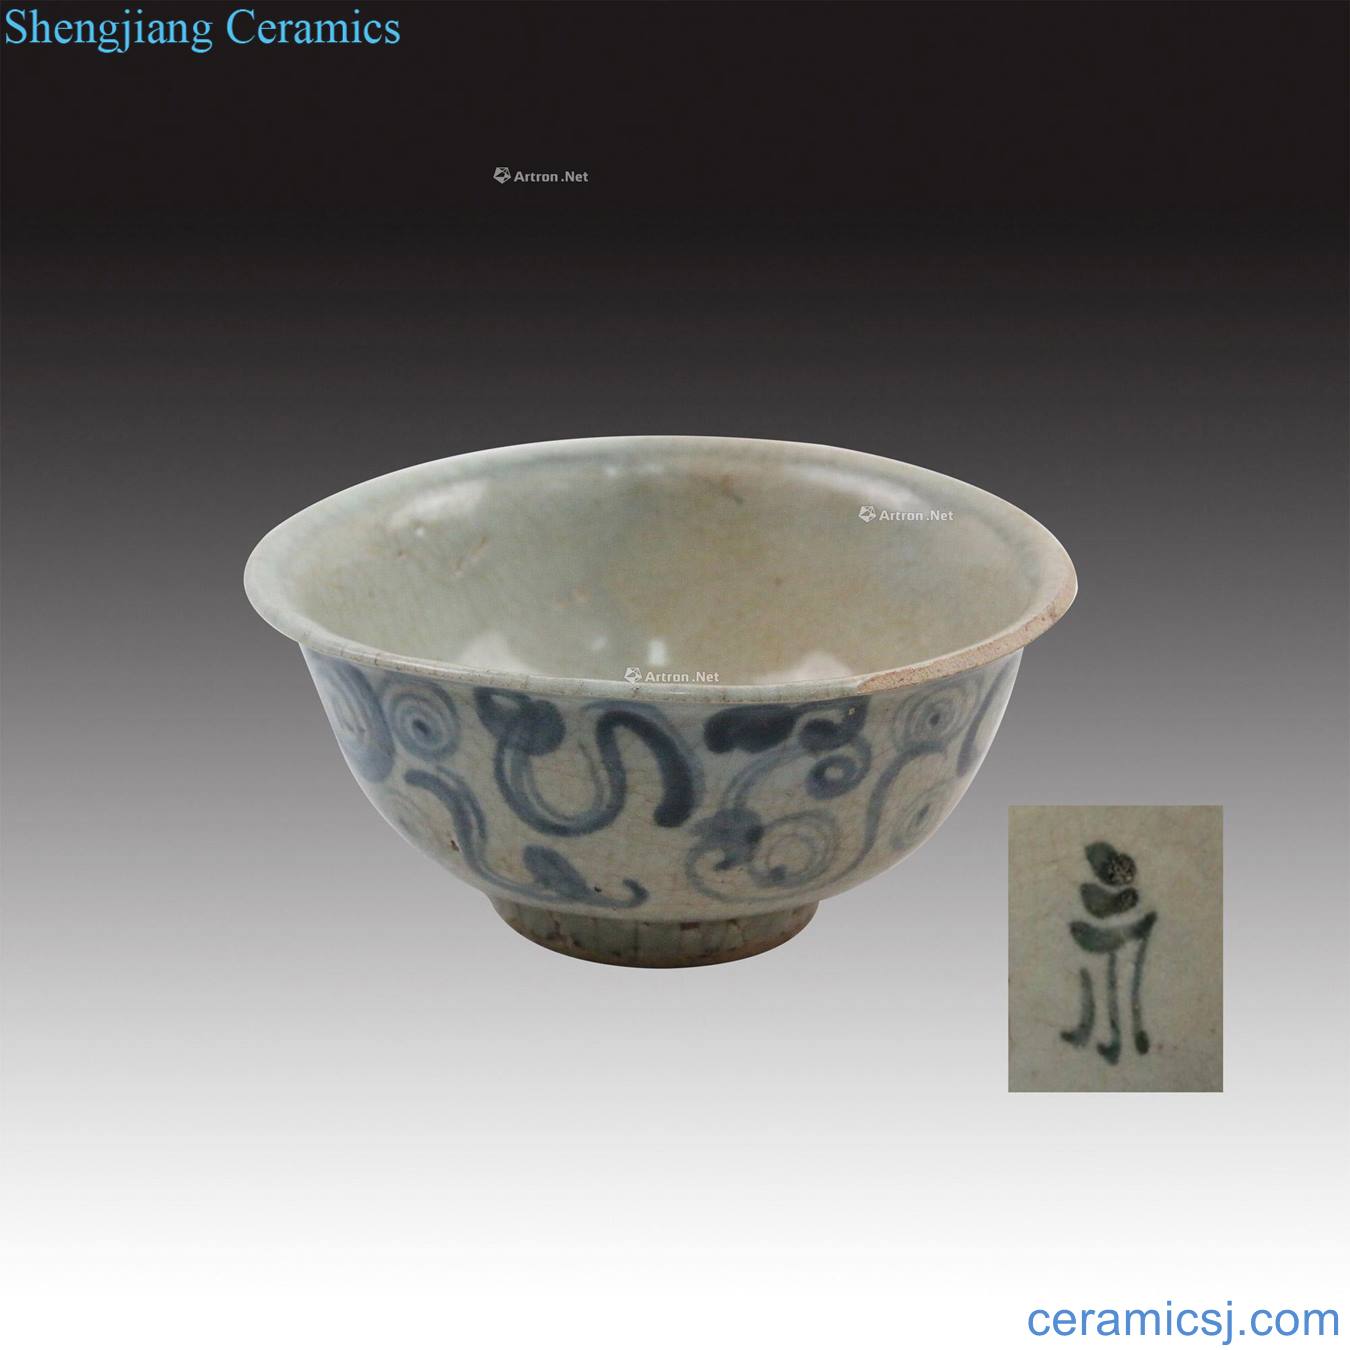 The early Ming dynasty porcelain bowl